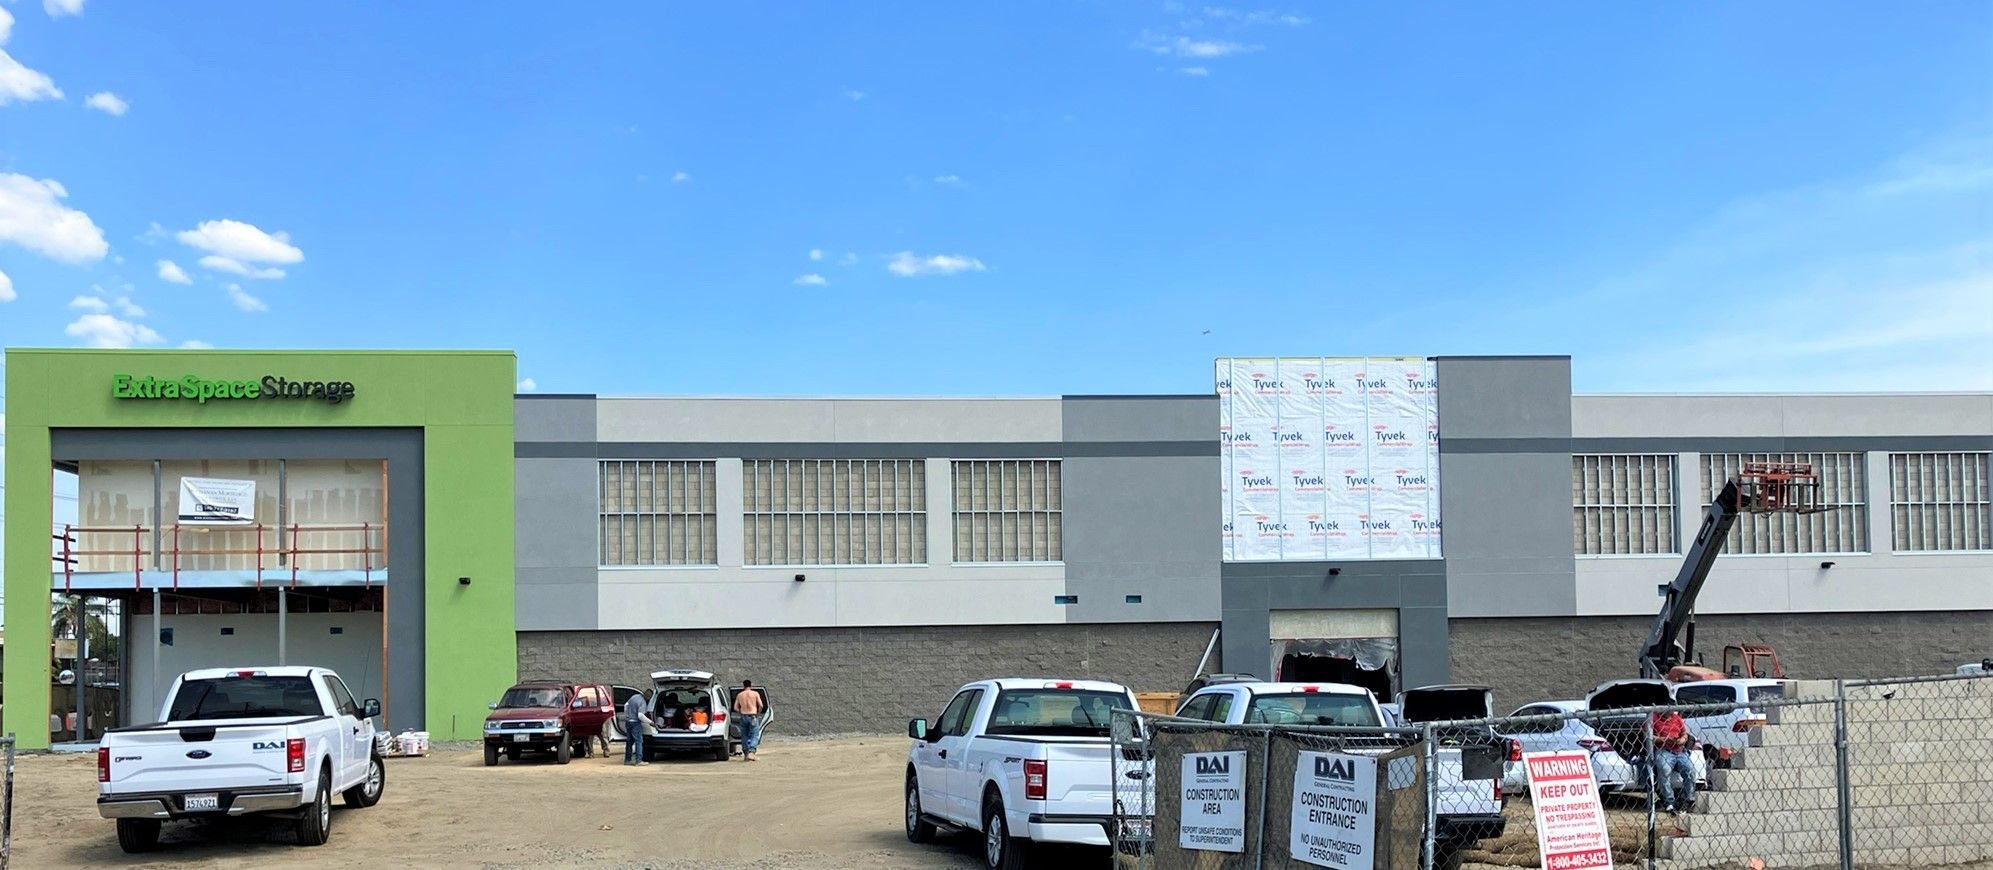 DAI Our Work Current Projects Nadeau Self-Storage September 2022 2.jpg